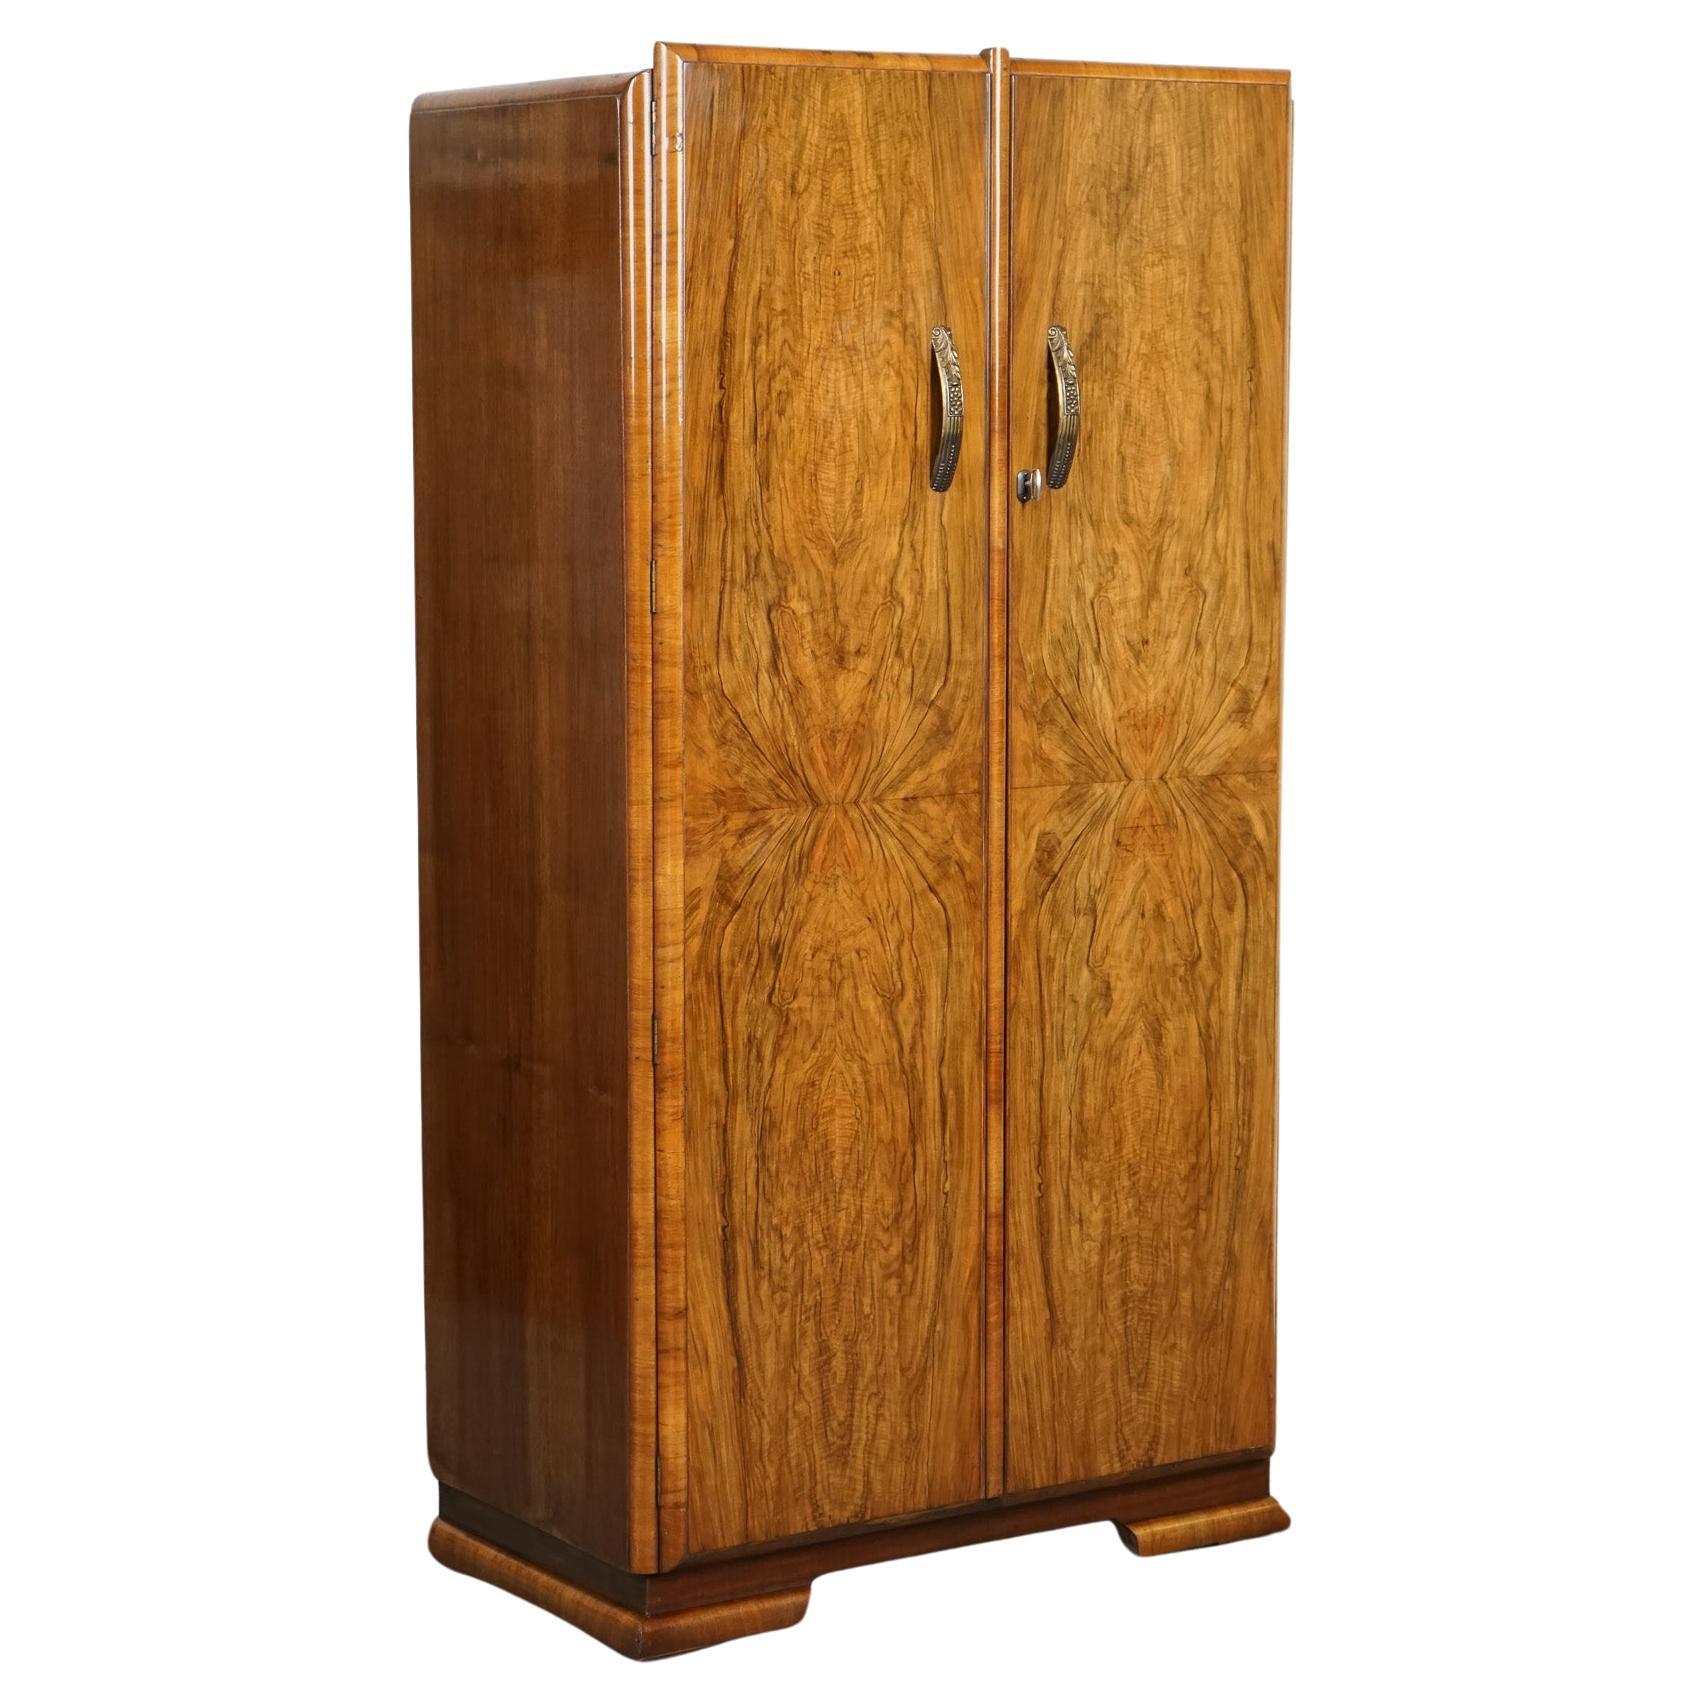 LOVELY SMALL COMPACT ART DECO BURR WALNuT WARDROBE For Sale